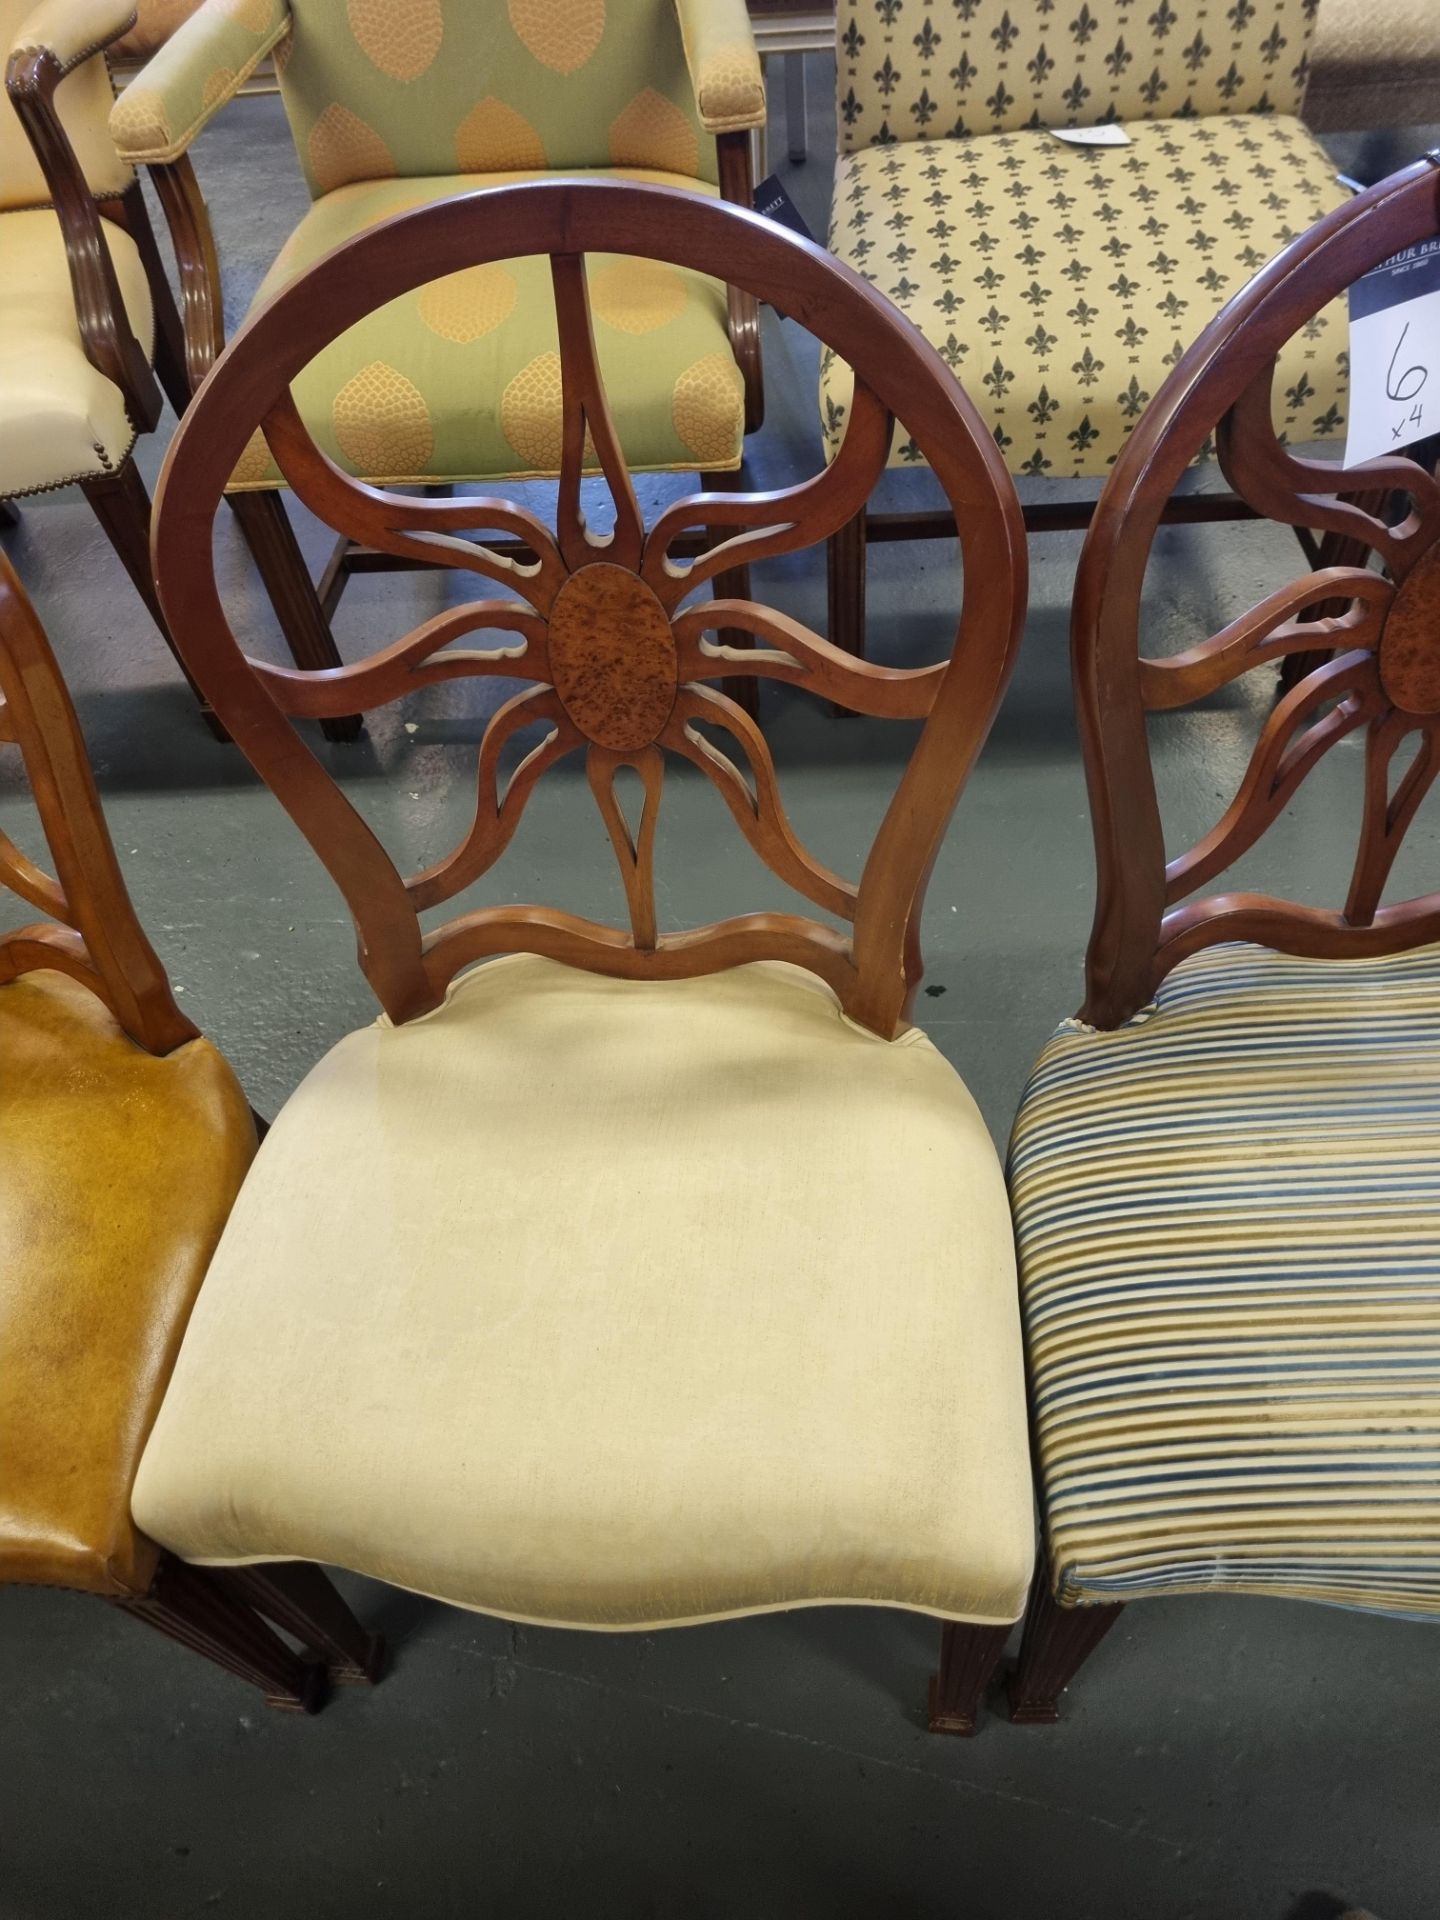 4 X Arthur Brett Mahogany Sunburst Side Chair With Bespoke Assorted Patterned Upholstery George - Image 3 of 5